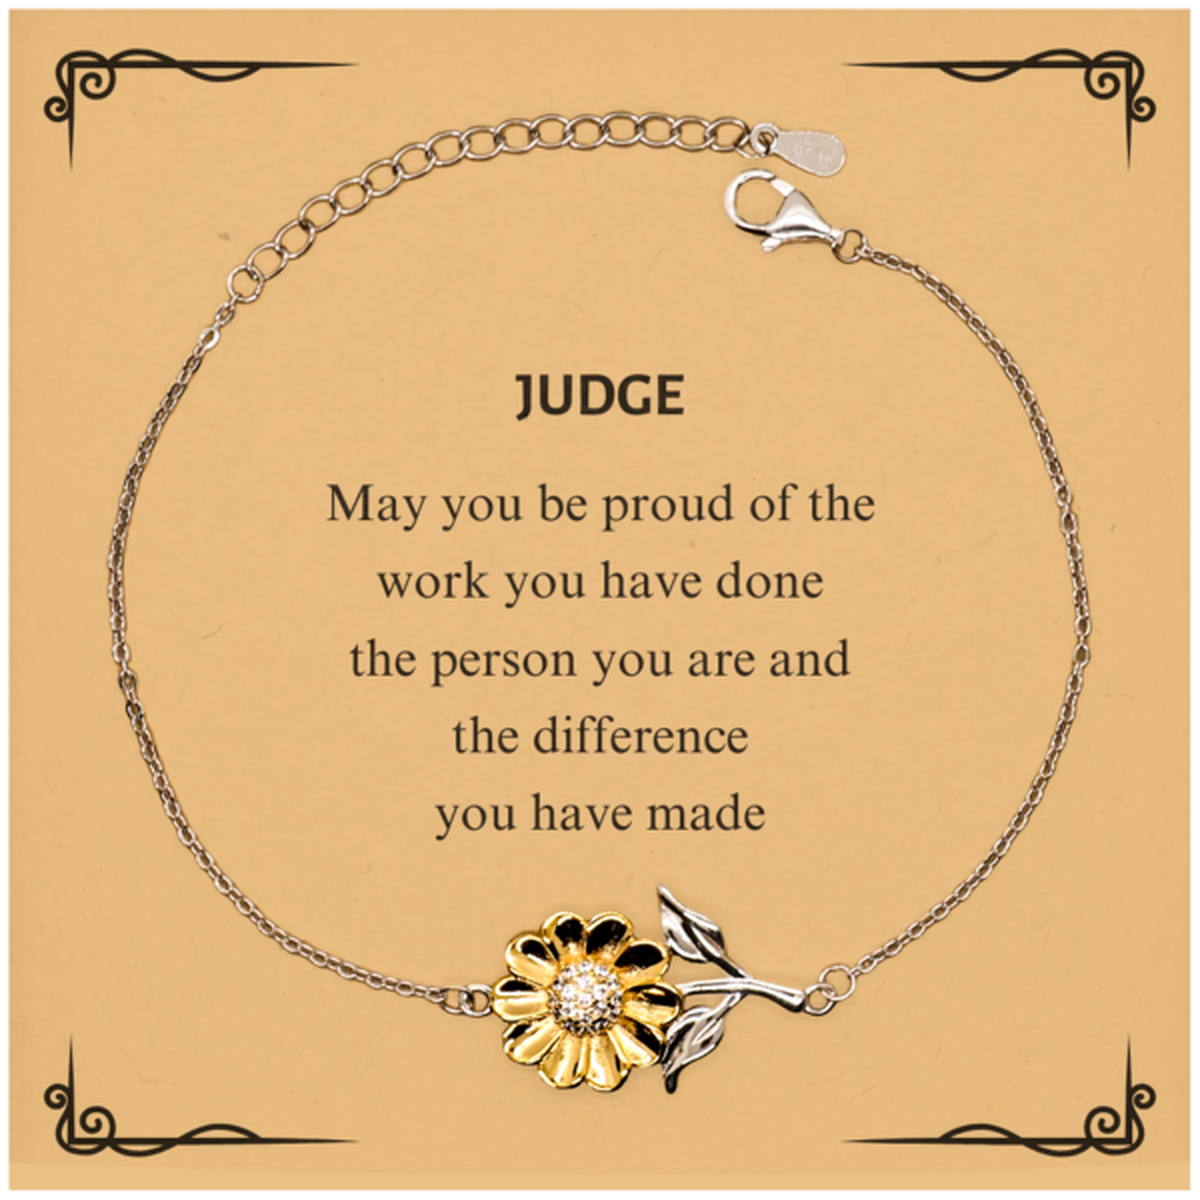 Judge May you be proud of the work you have done, Retirement Judge Sunflower Bracelet for Colleague Appreciation Gifts Amazing for Judge